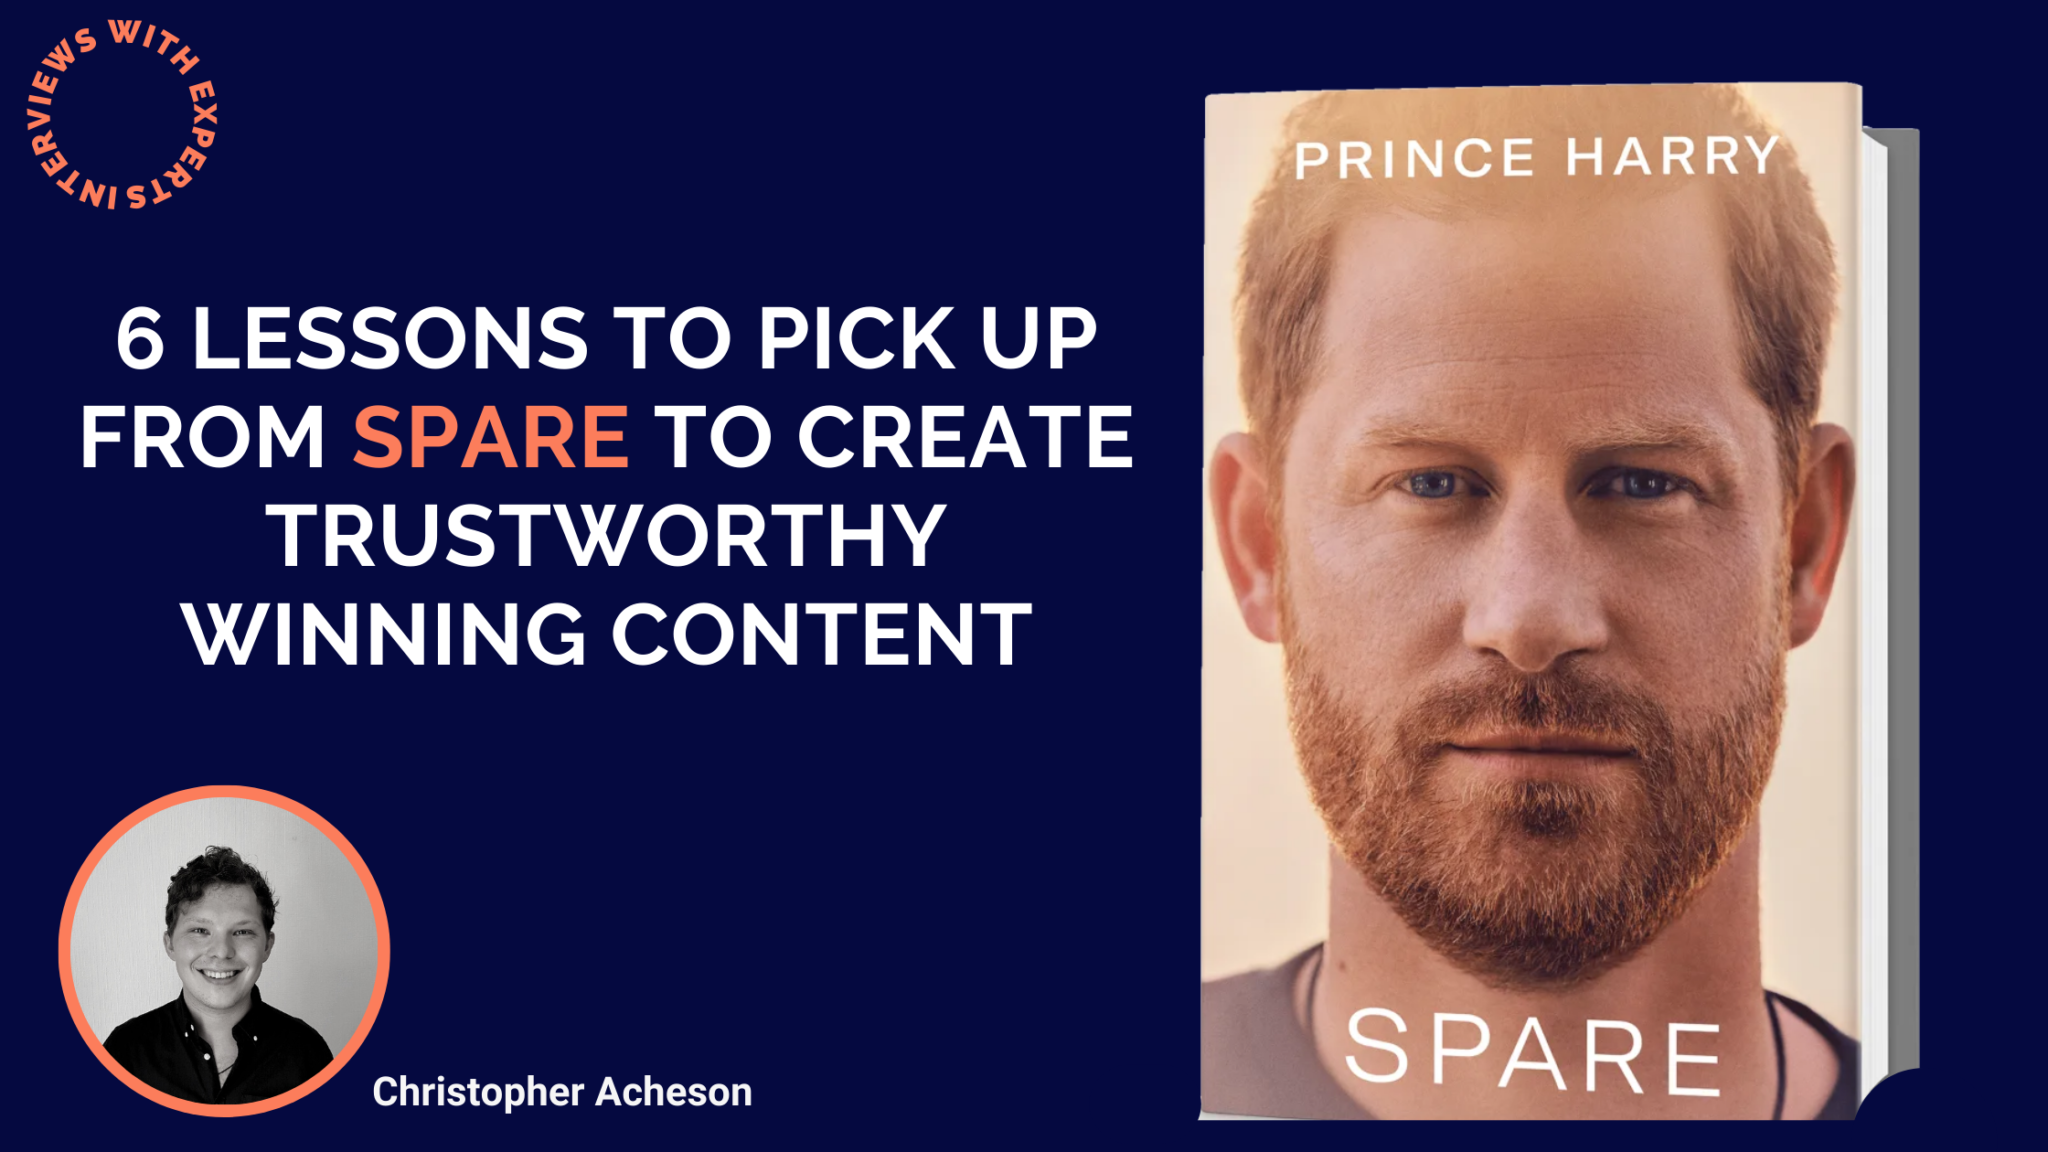 6 Lessons To Pick Up From Spare To Create Trustworthy Winning Content